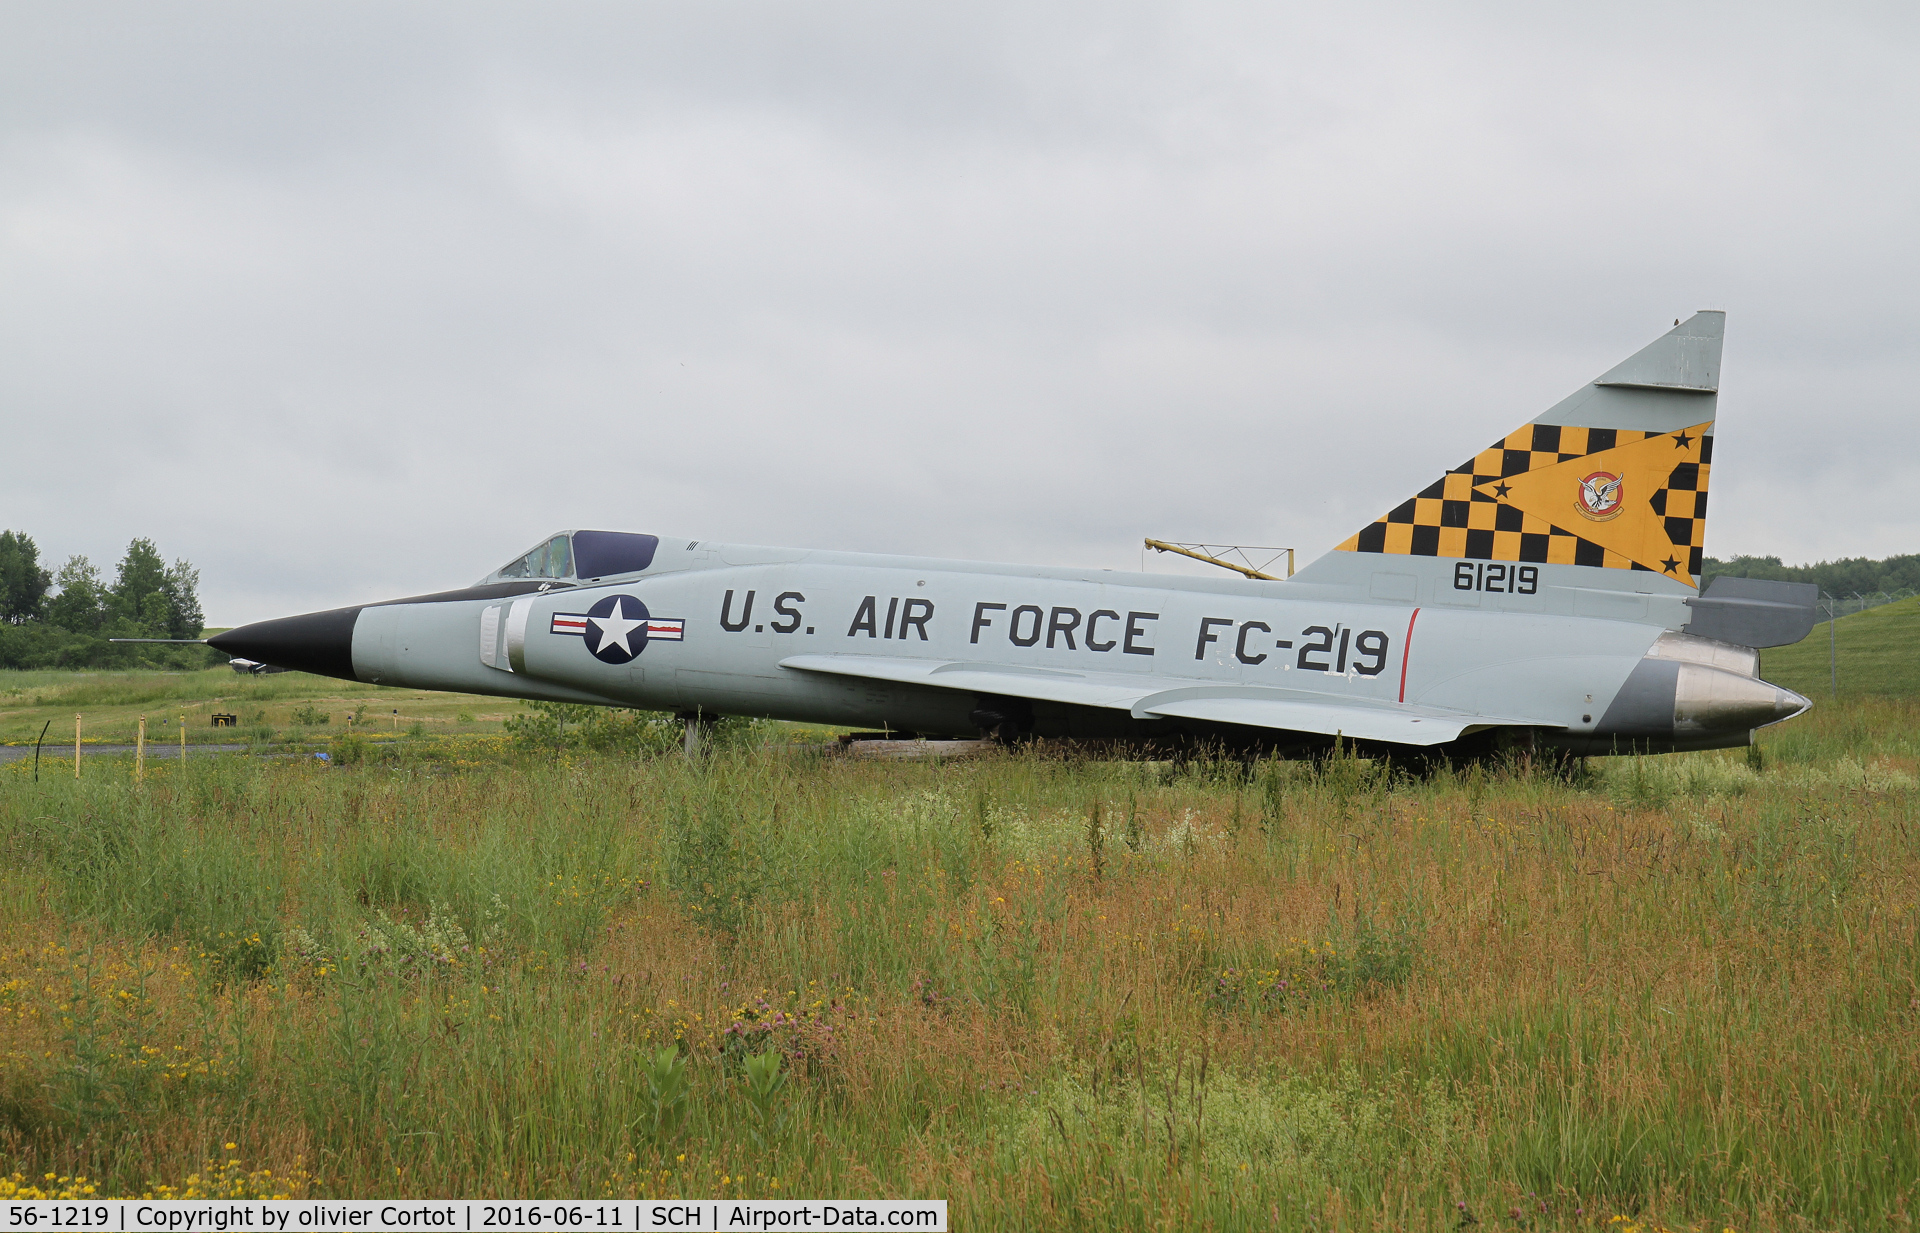 56-1219, 1956 Convair F-102A Delta Dagger C/N 8-10-351, in the weeds